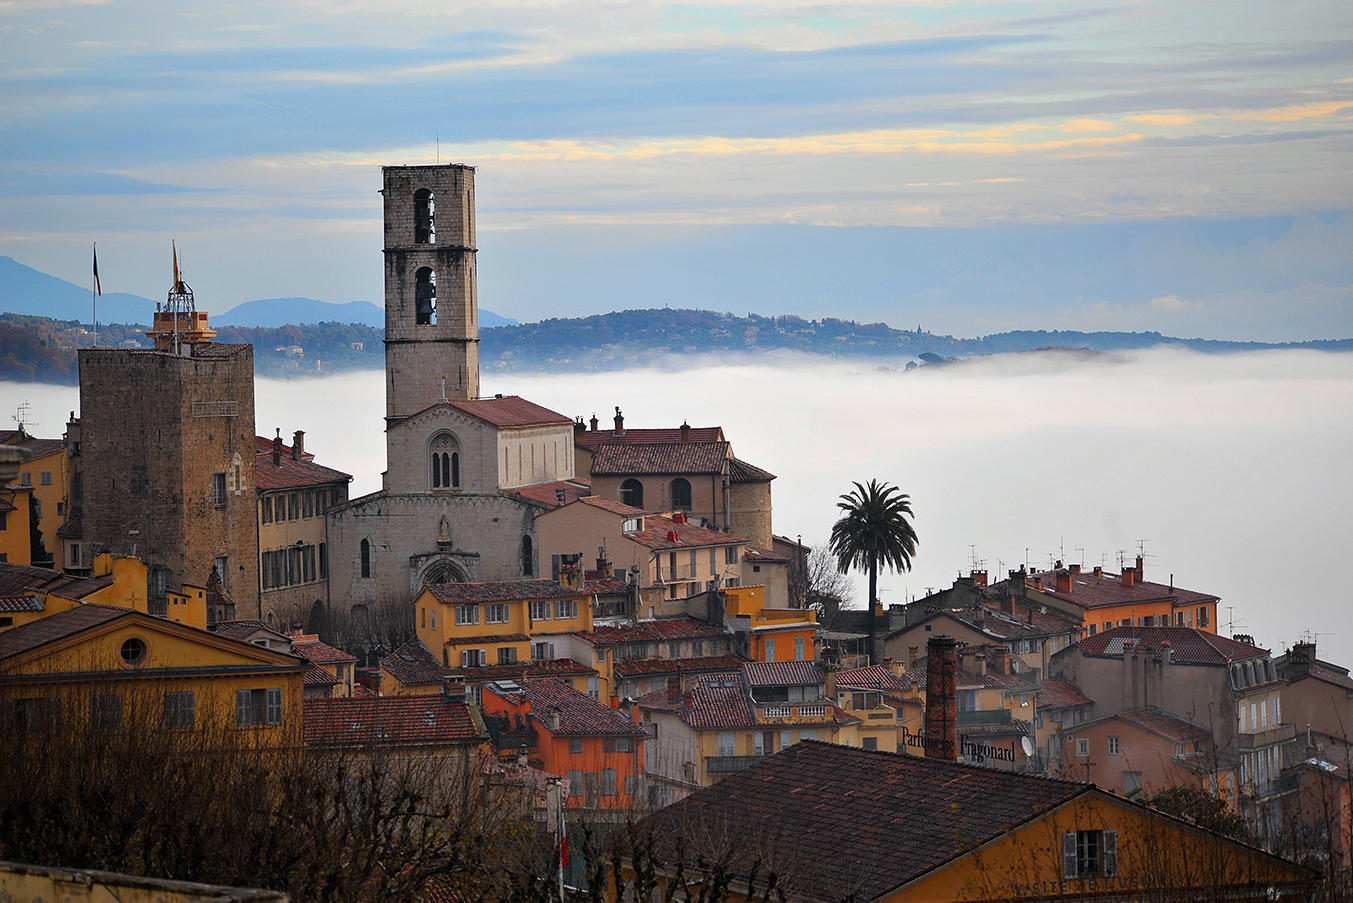 Grasse: The perfume capital of the world